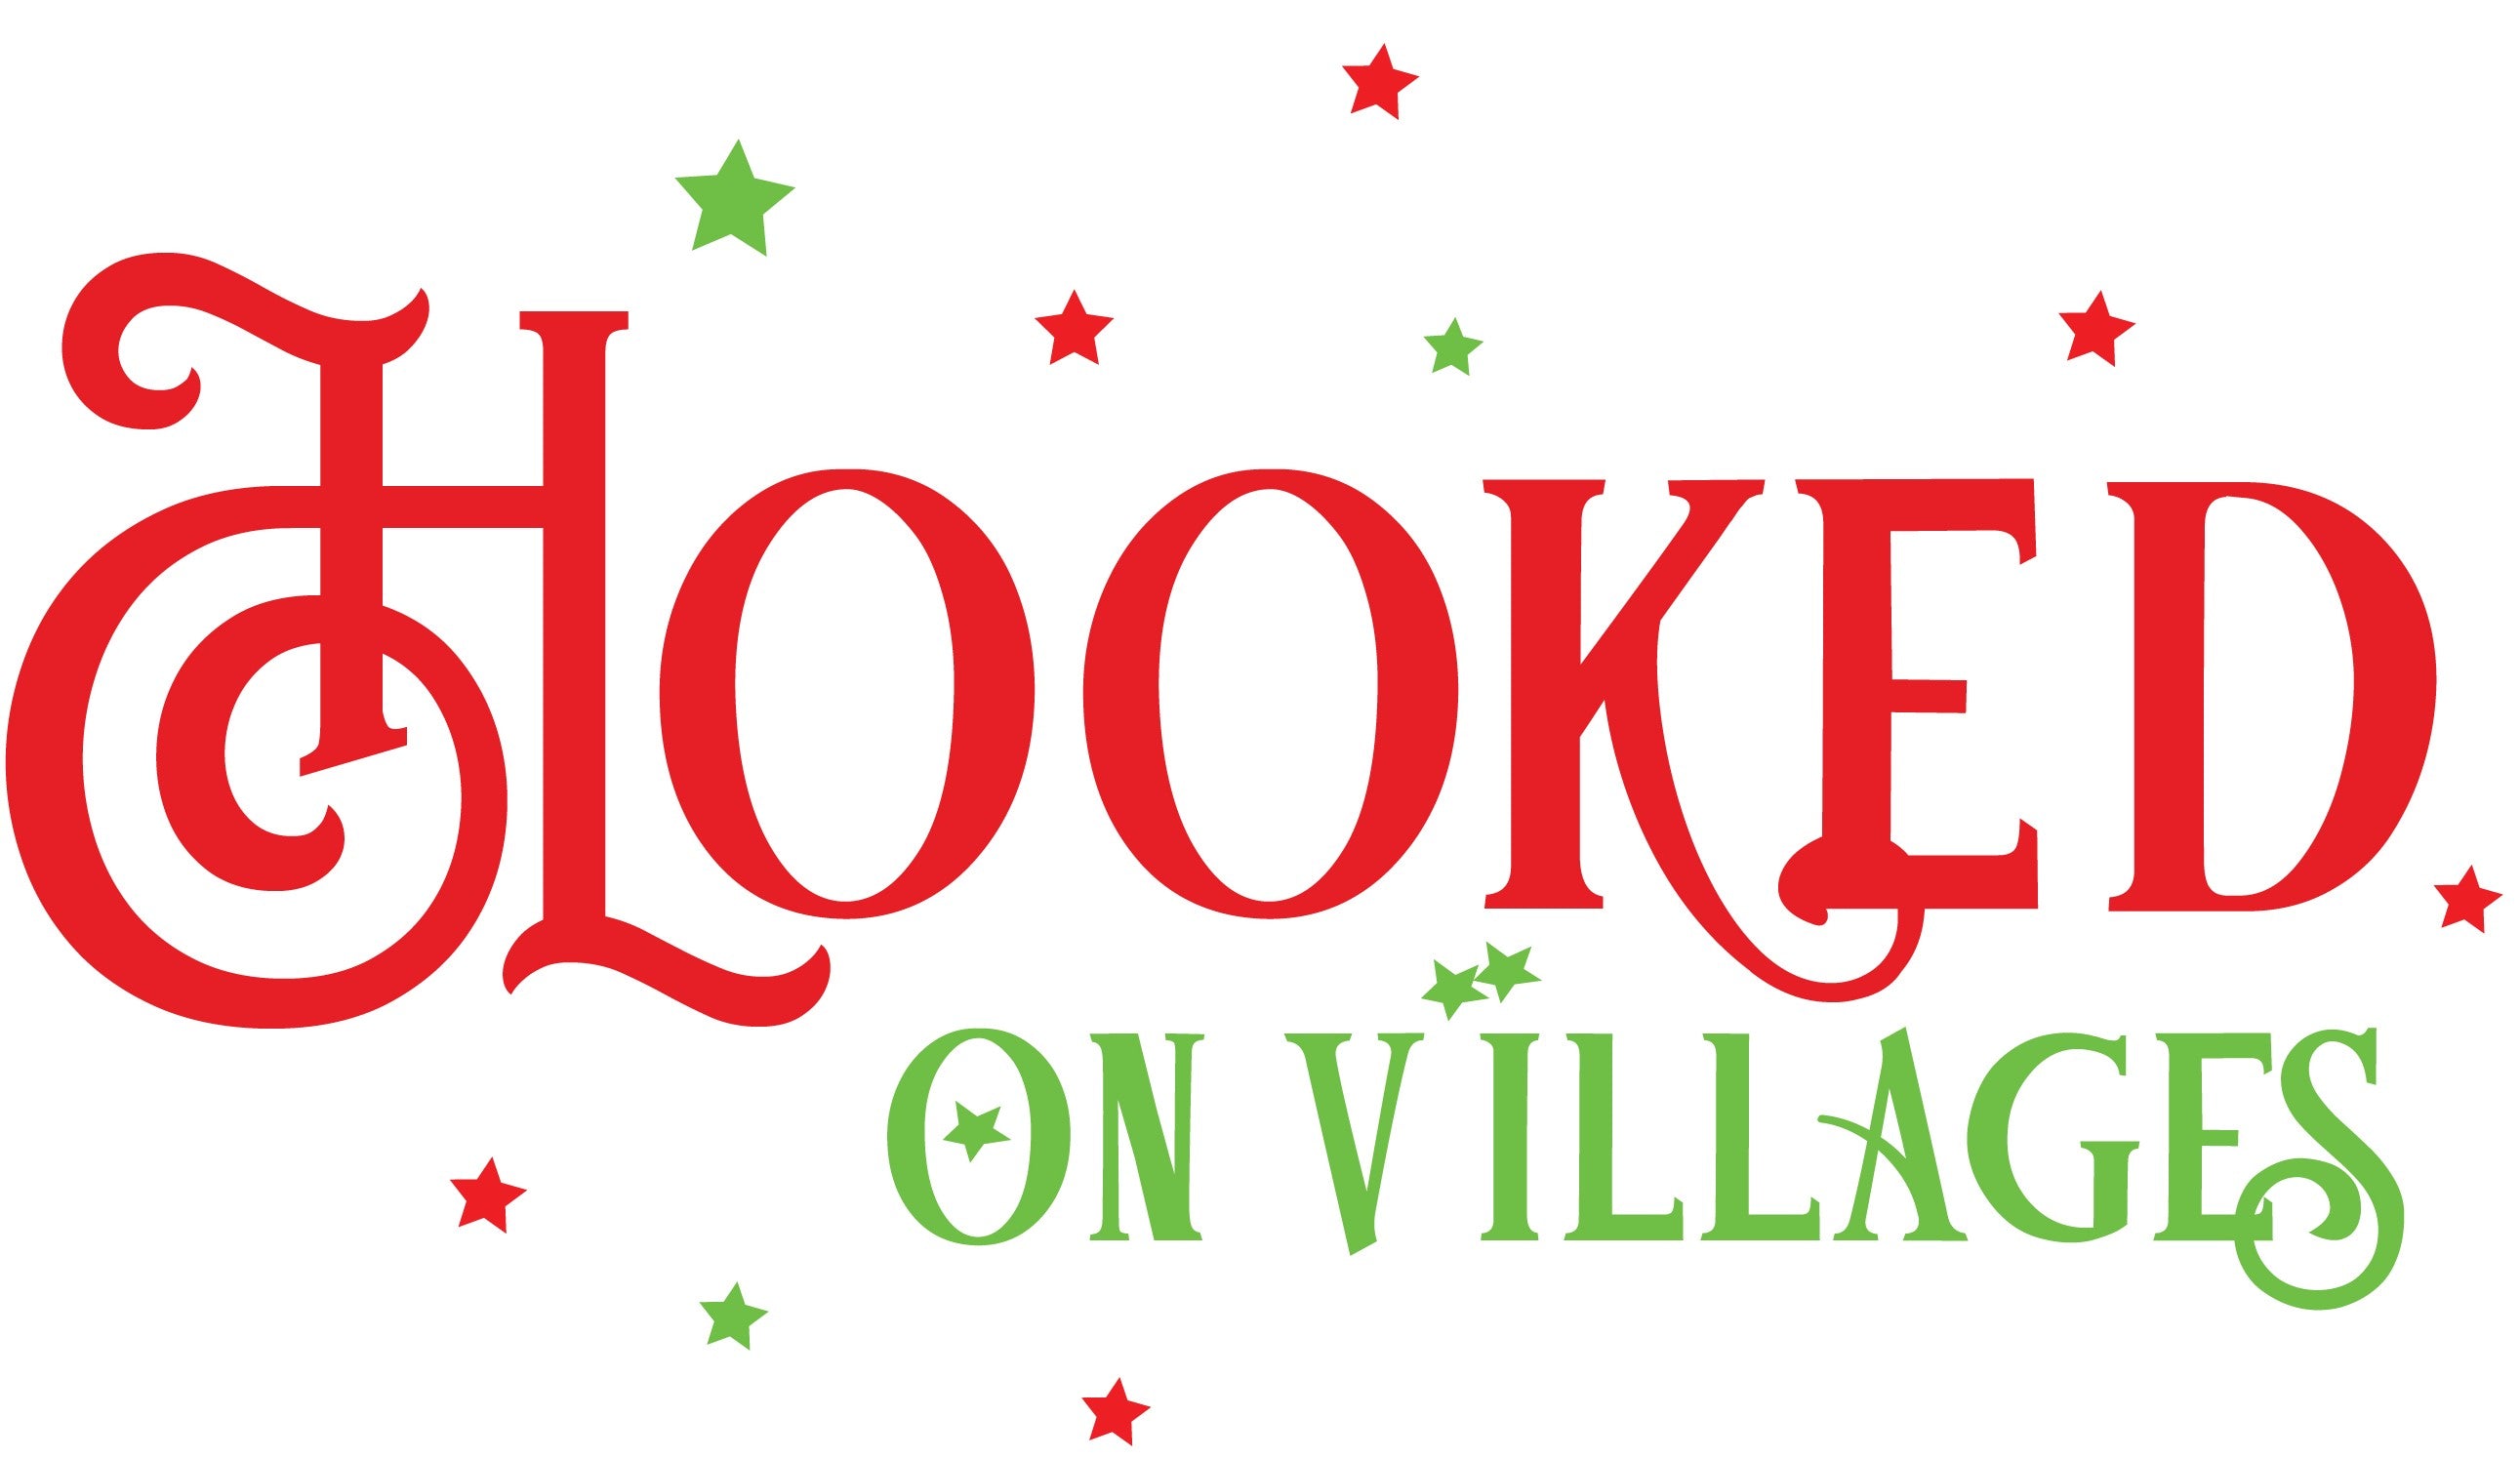 Seasons Bay – Hooked on Villages